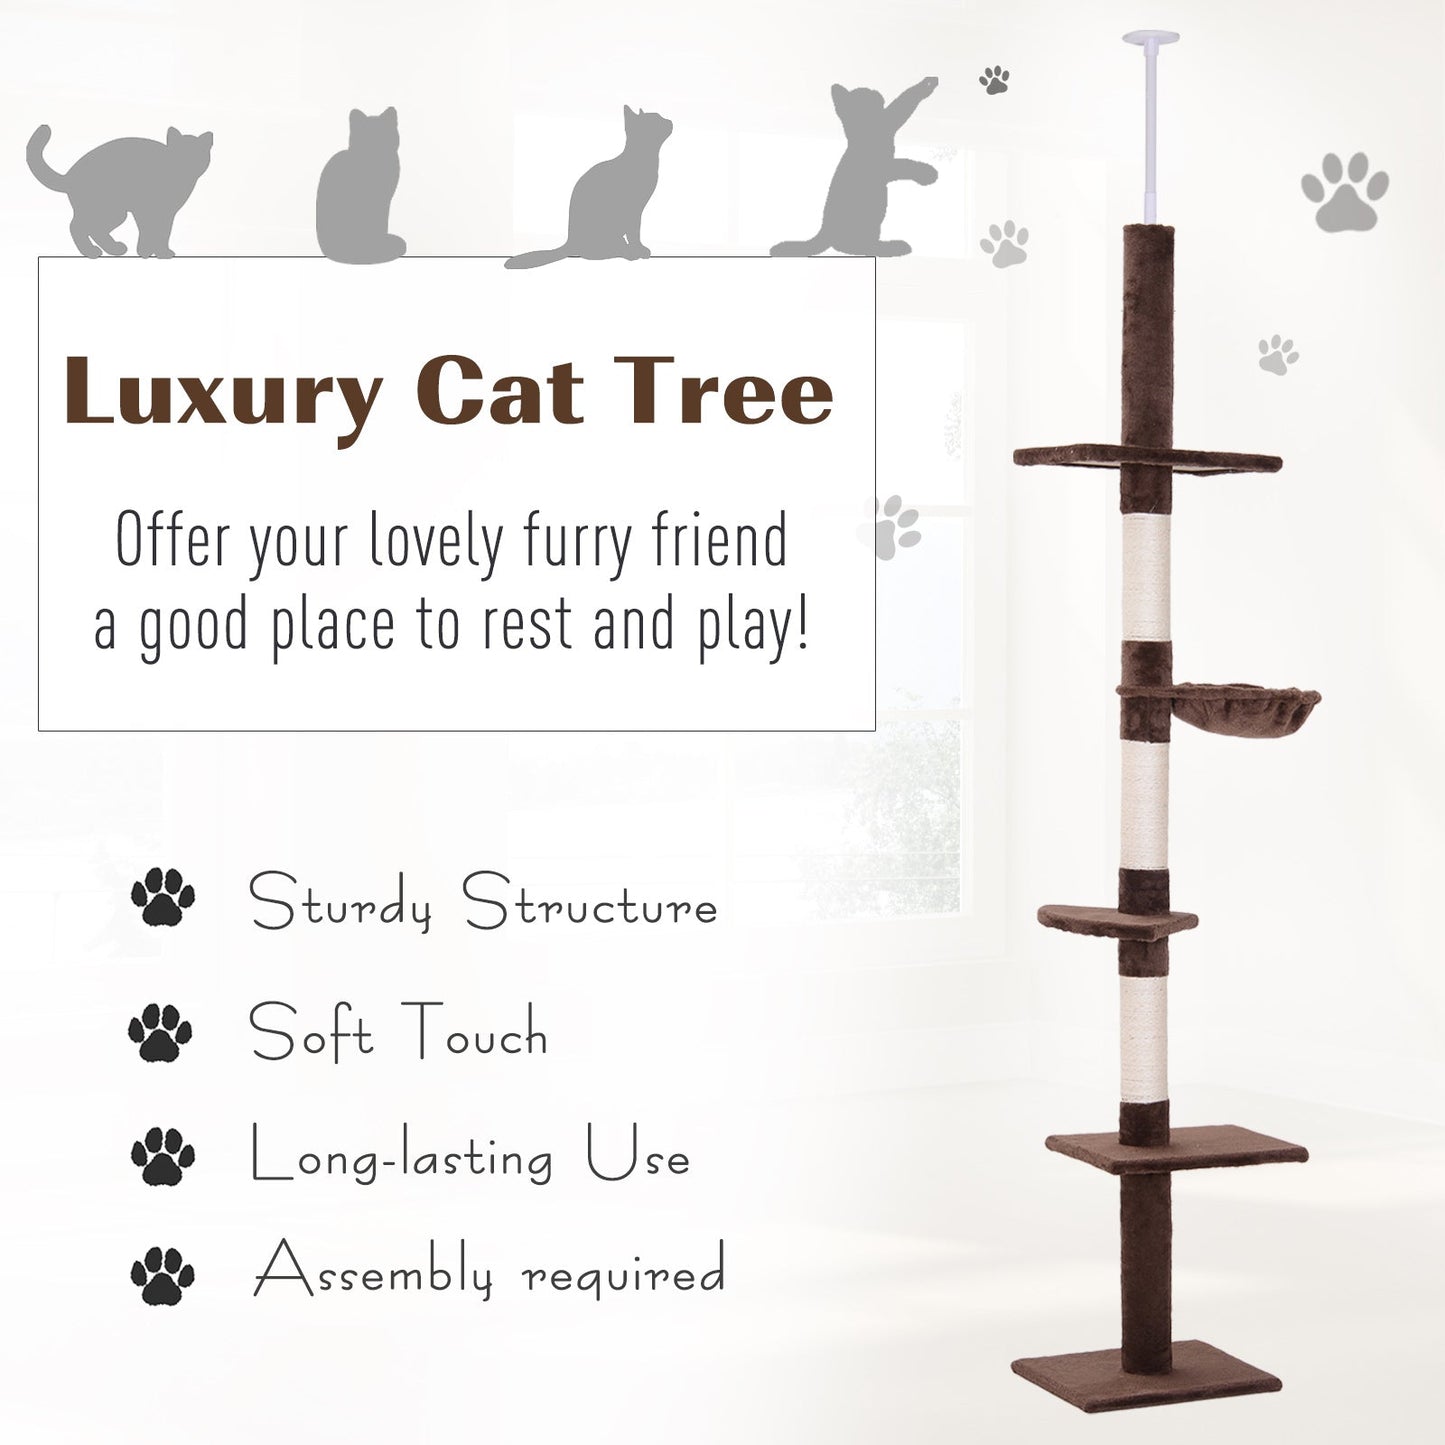 -PawHut 9' Modern Cat Tree Adjustable Height Floor-To-Ceiling Vertical Cat Tree - Brown and White - Outdoor Style Company